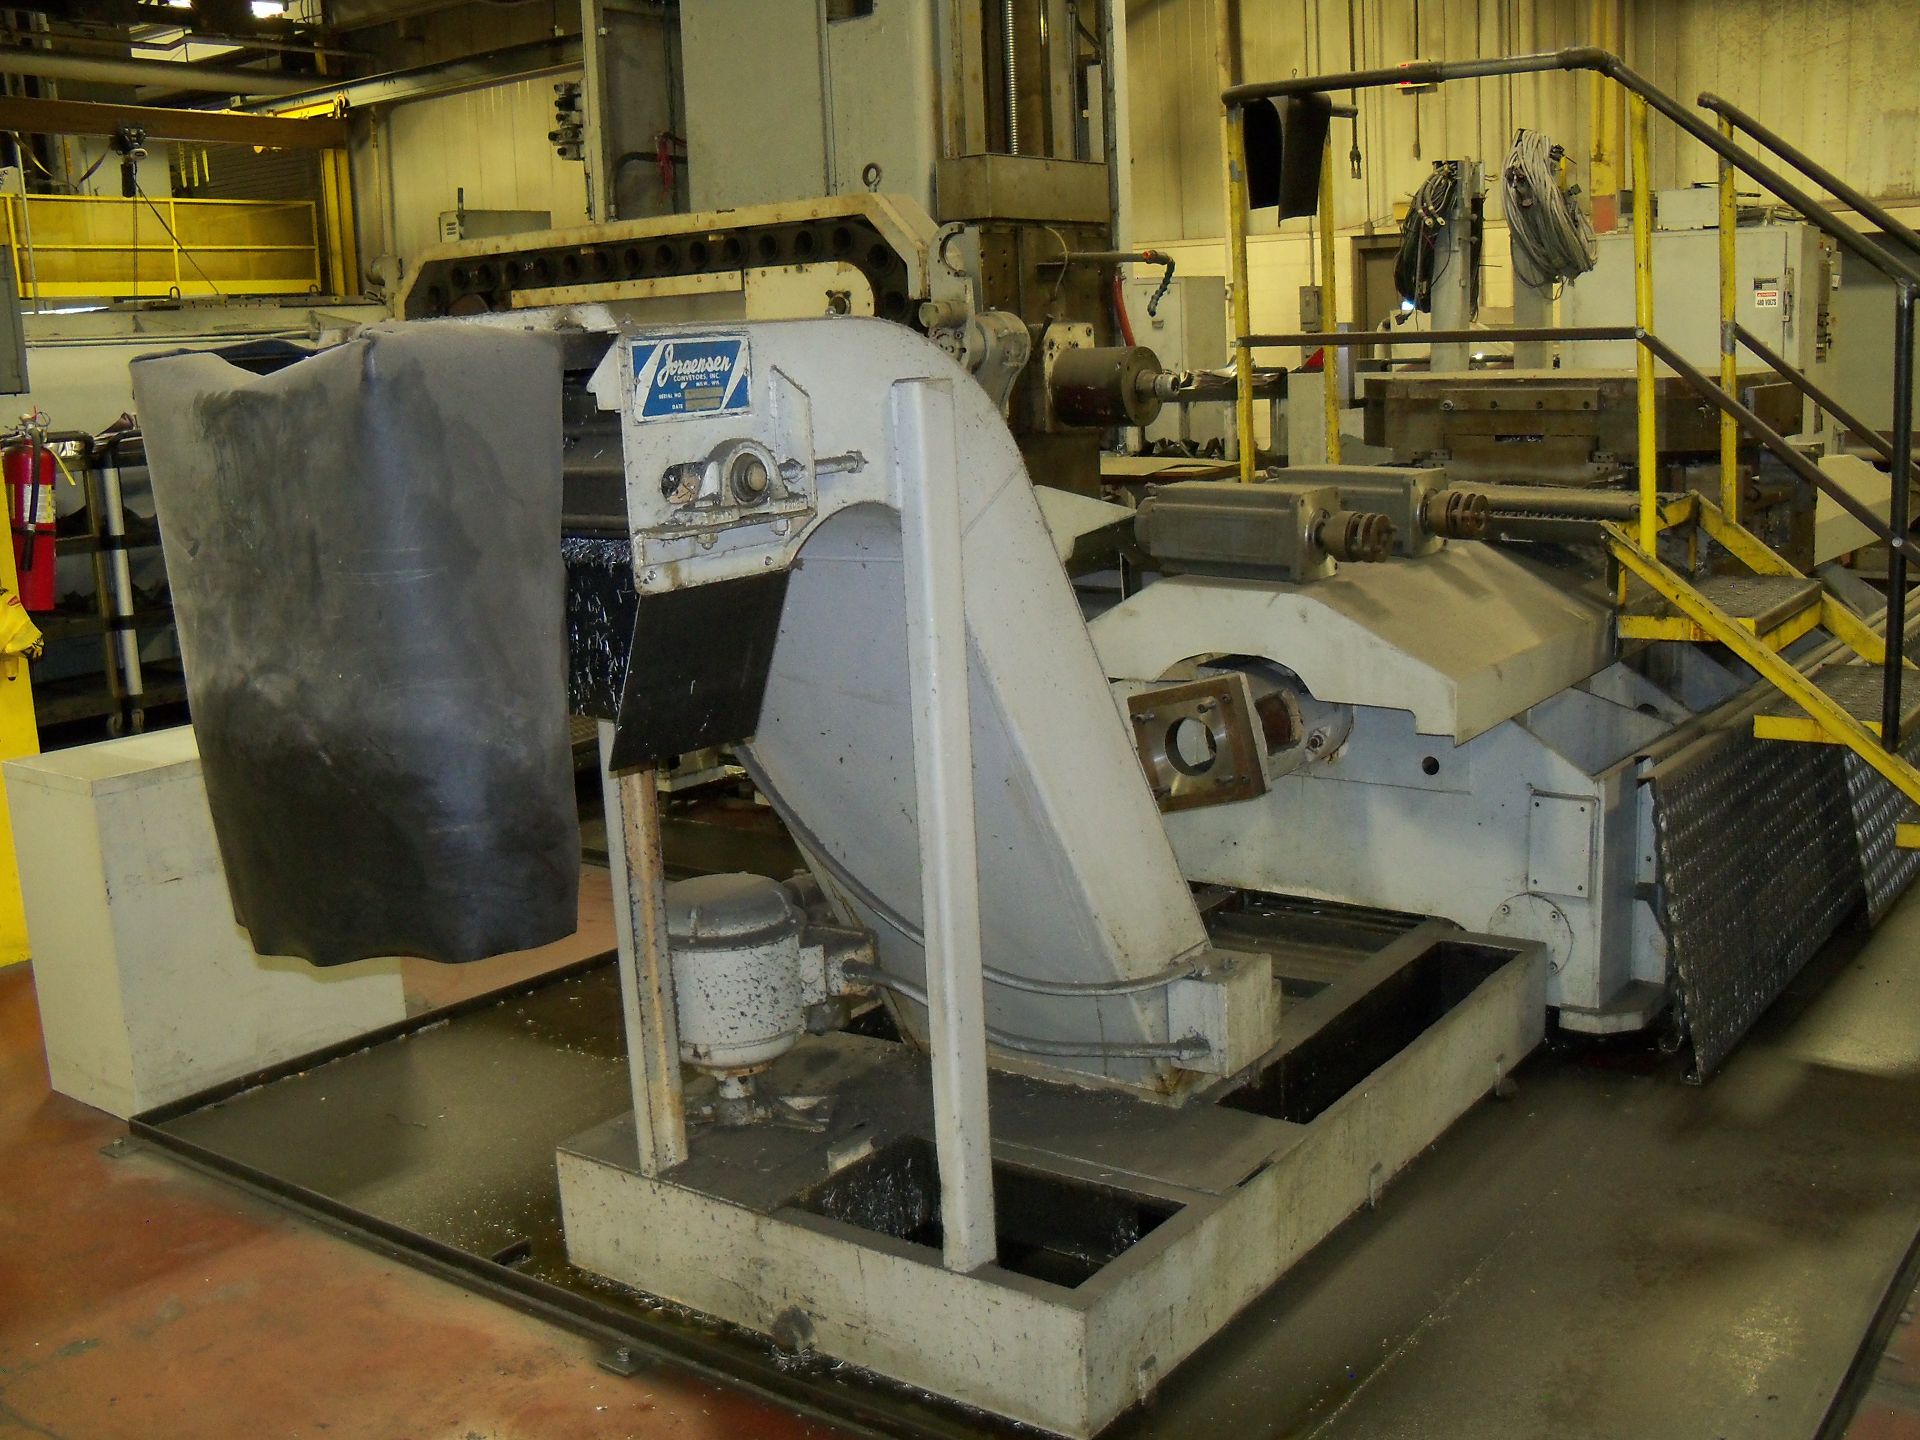 Excello 520 CNC Horizontal Mill, Mitsubishi Ctrl, 32 ATC, Rotary Table (Located in Thomasville, GA) - Image 9 of 10